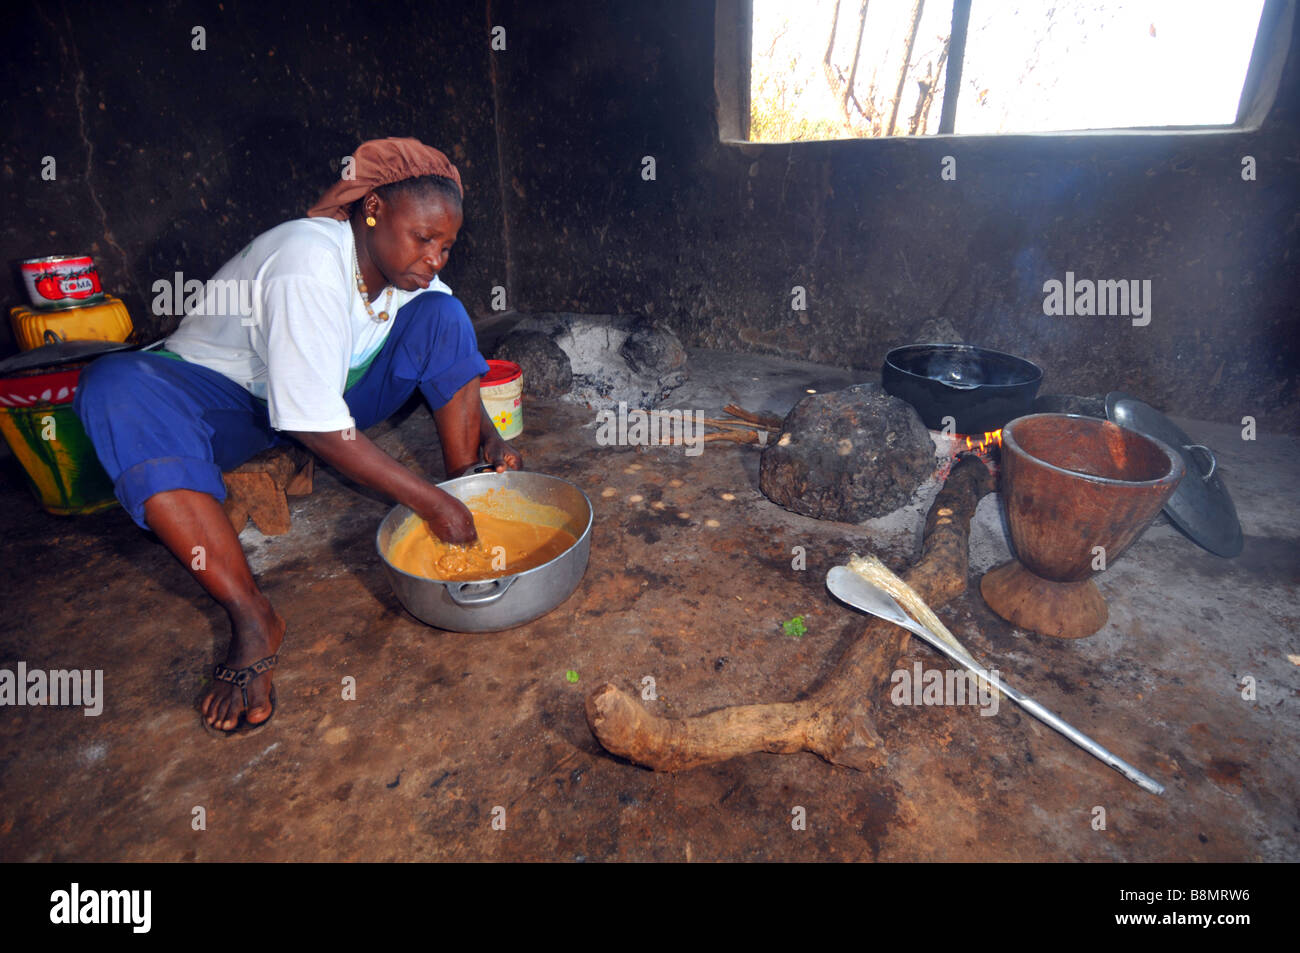 Woman cooking over an open fire in her basic rural village kitchen, The Gambia, West Africa Stock Photo